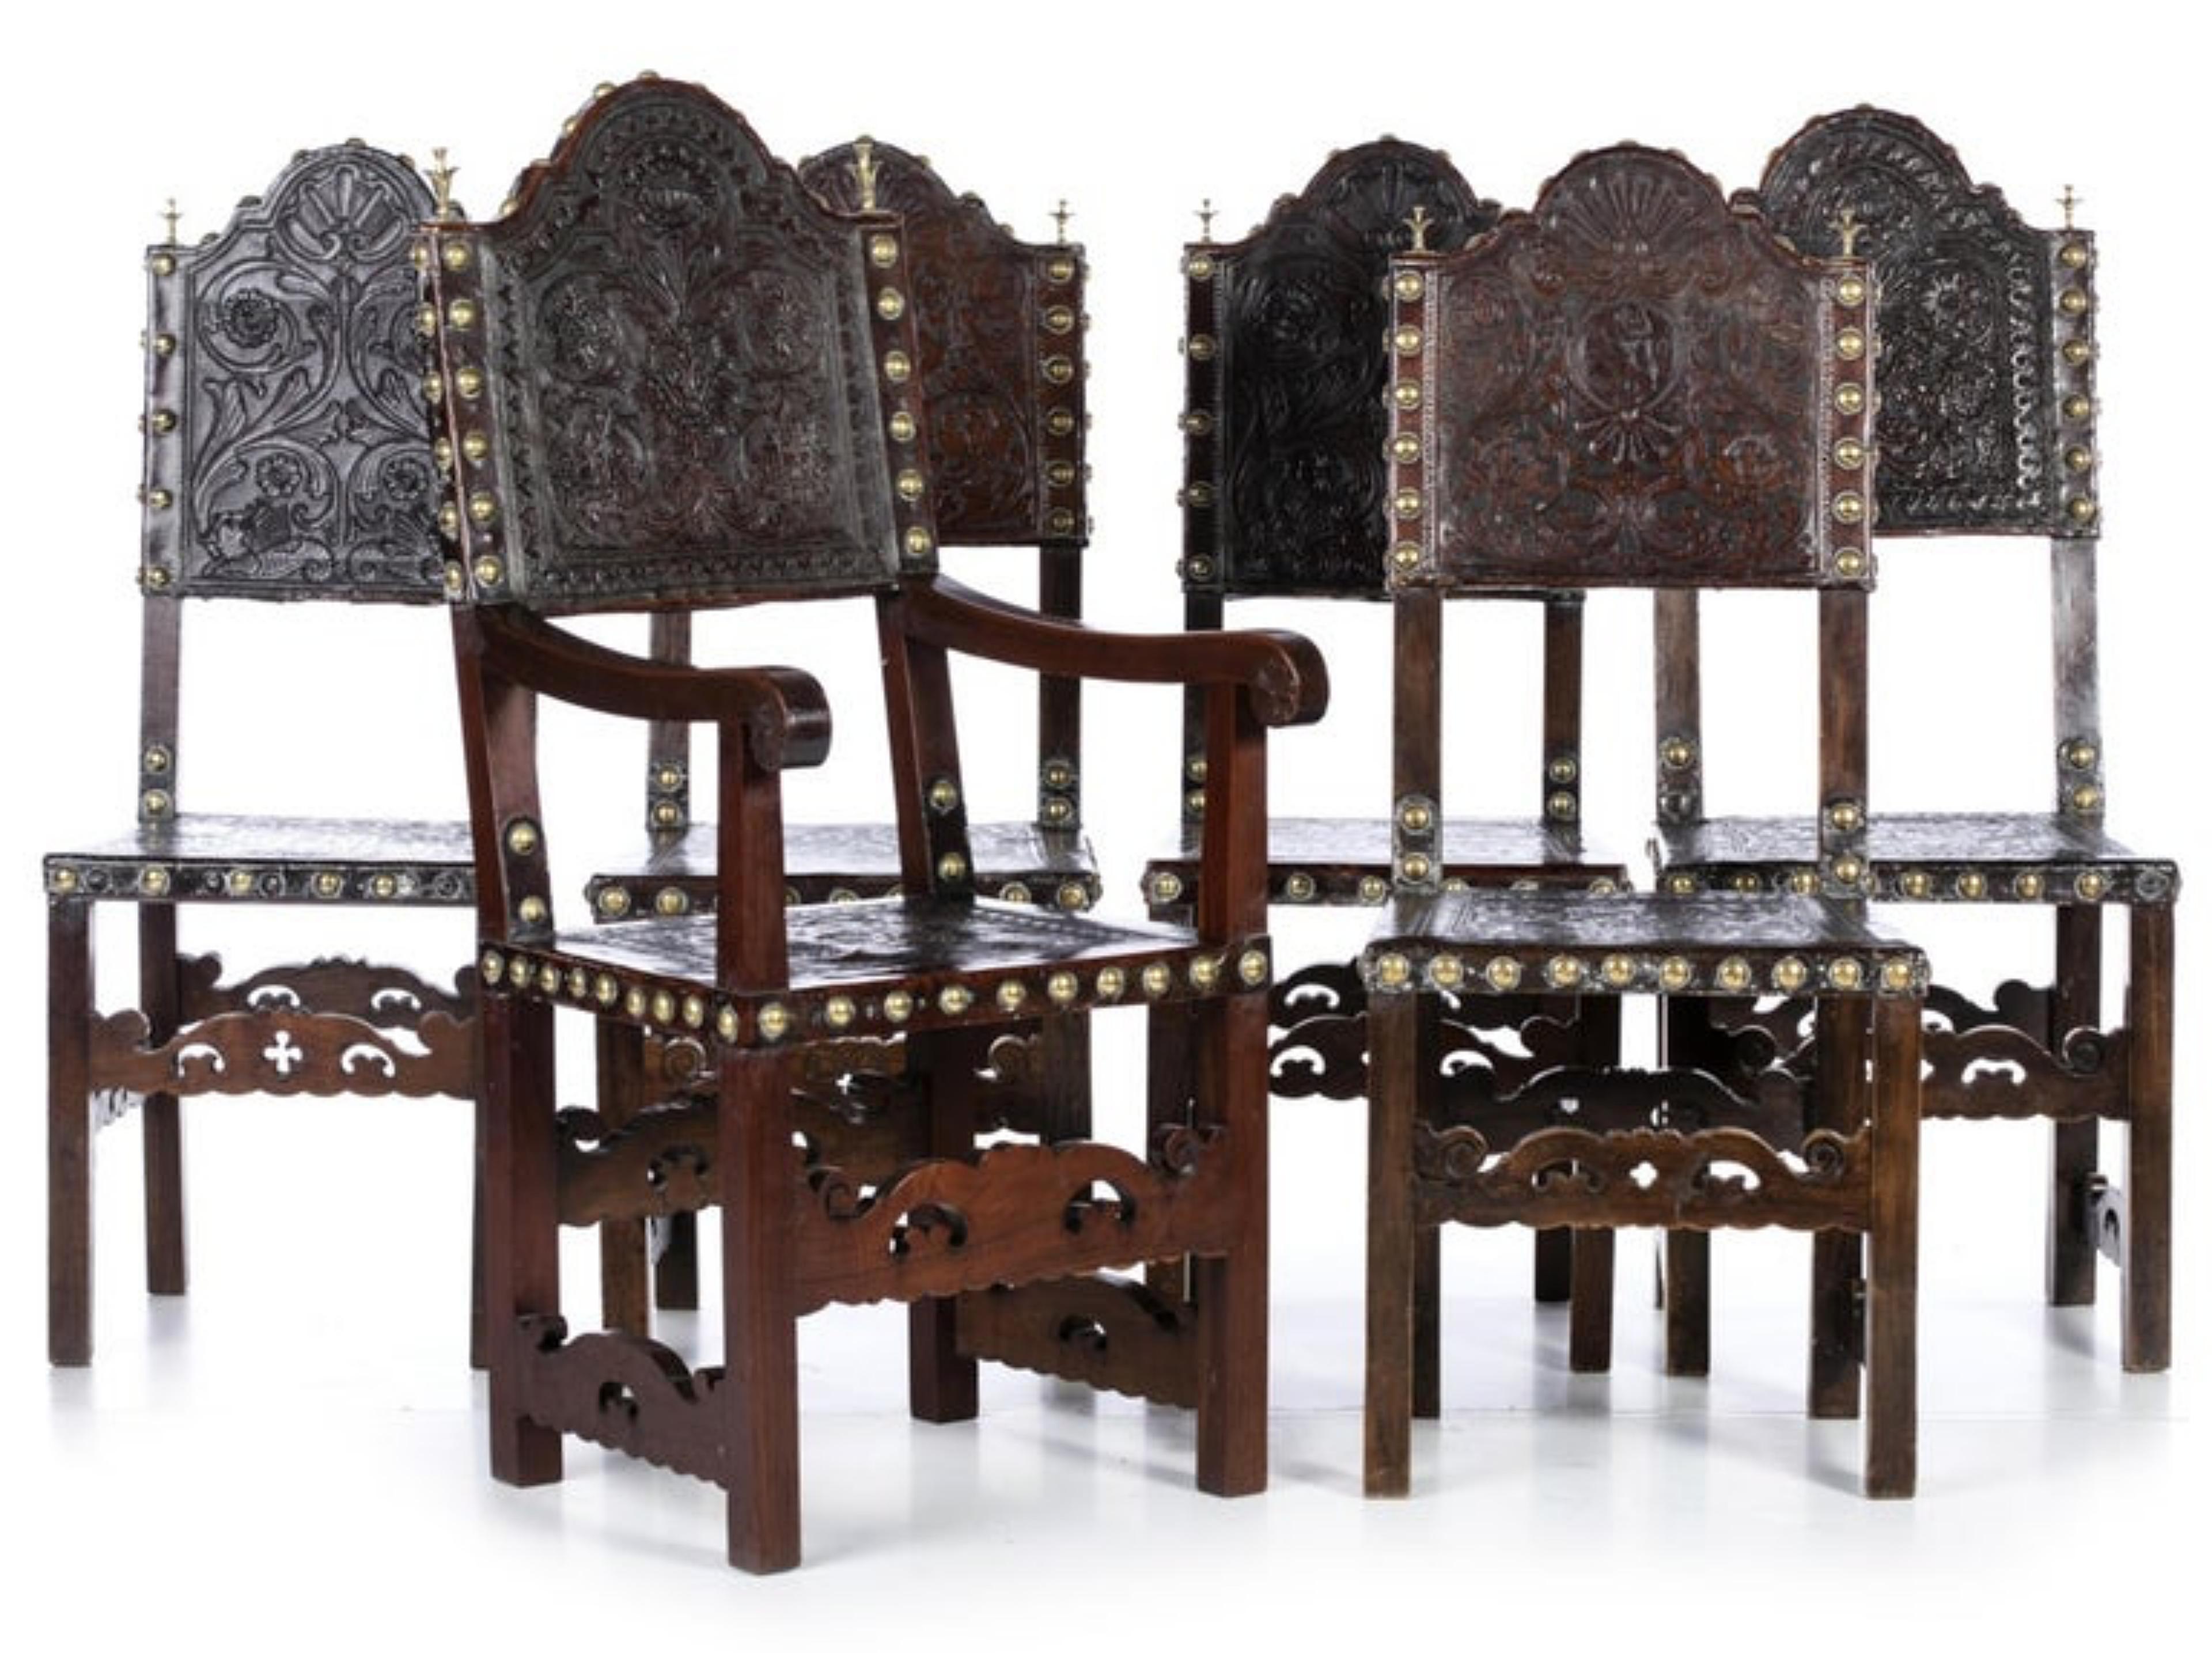 Five chairs and armchairs

Portuguese,
19th century
in chestnut and vinasse wood, in leather and nailing. Turned and carved wood legs and crossbars.
Some defects of the age
Dim.: 117 x 53.5 x 54.5 cm
good condition.